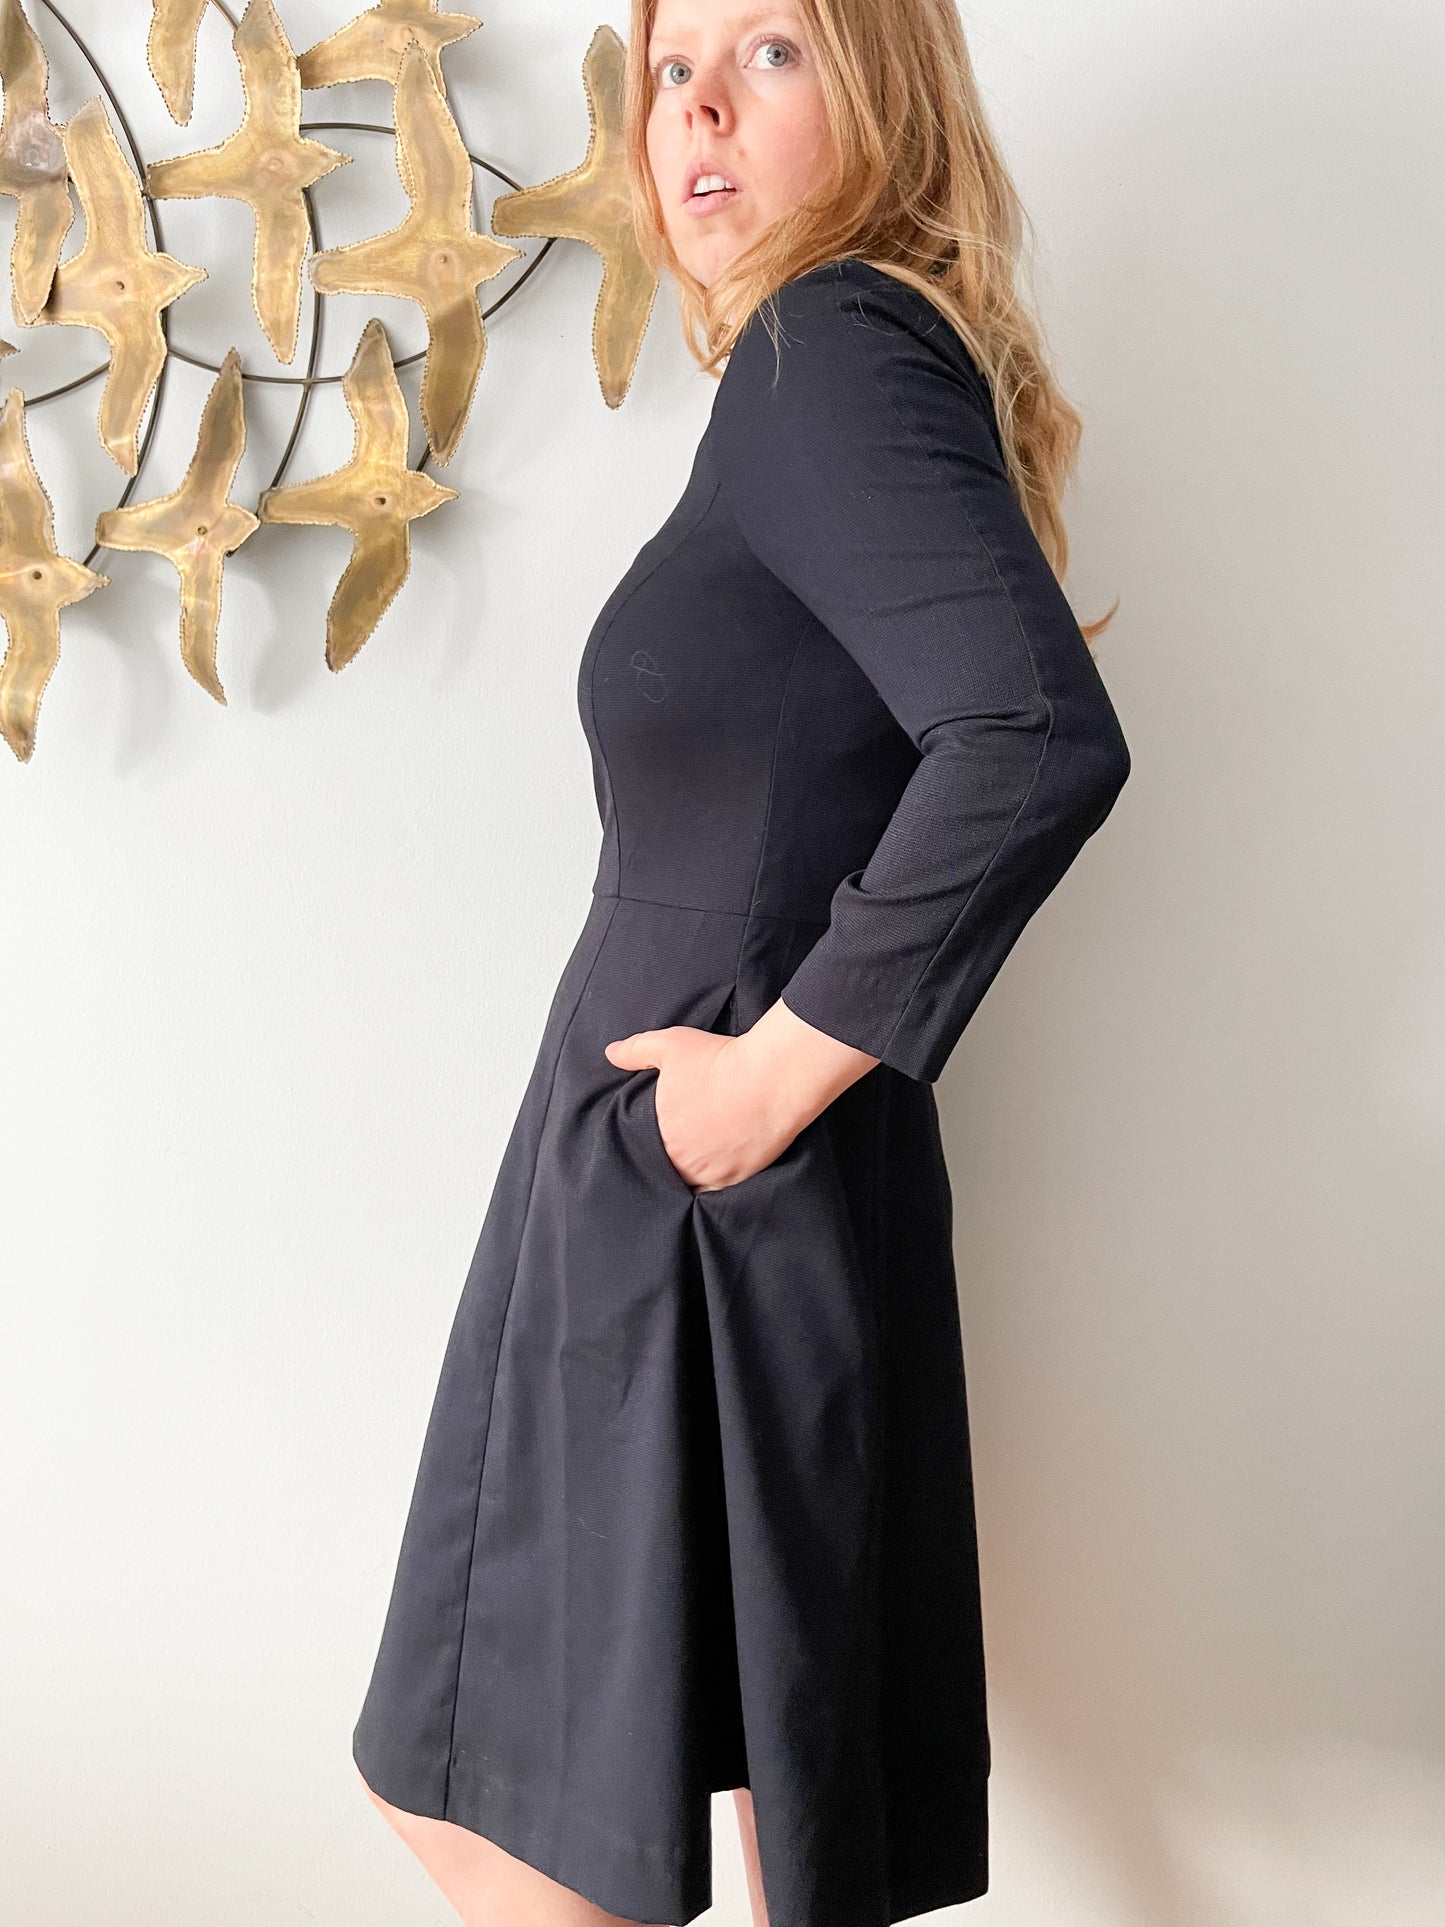 Navy Boat Neck 3/4 Sleeve Fit Flare Dress - Small